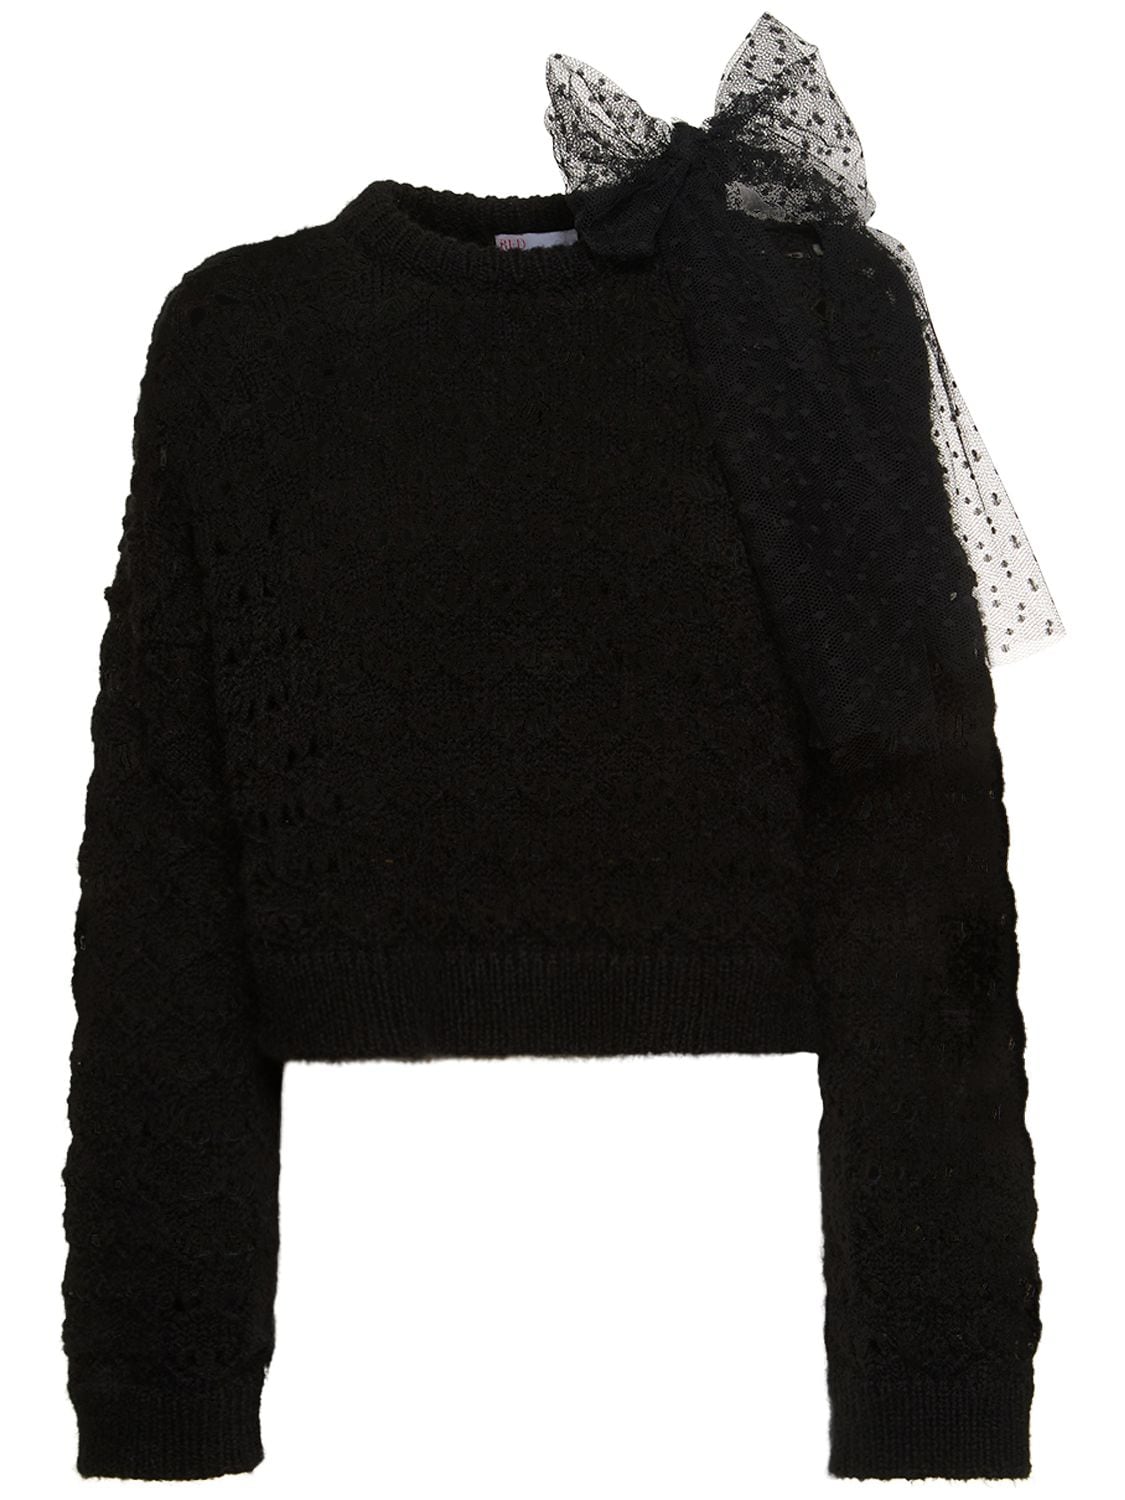 Image of Acrylic Blend Knit Sweater